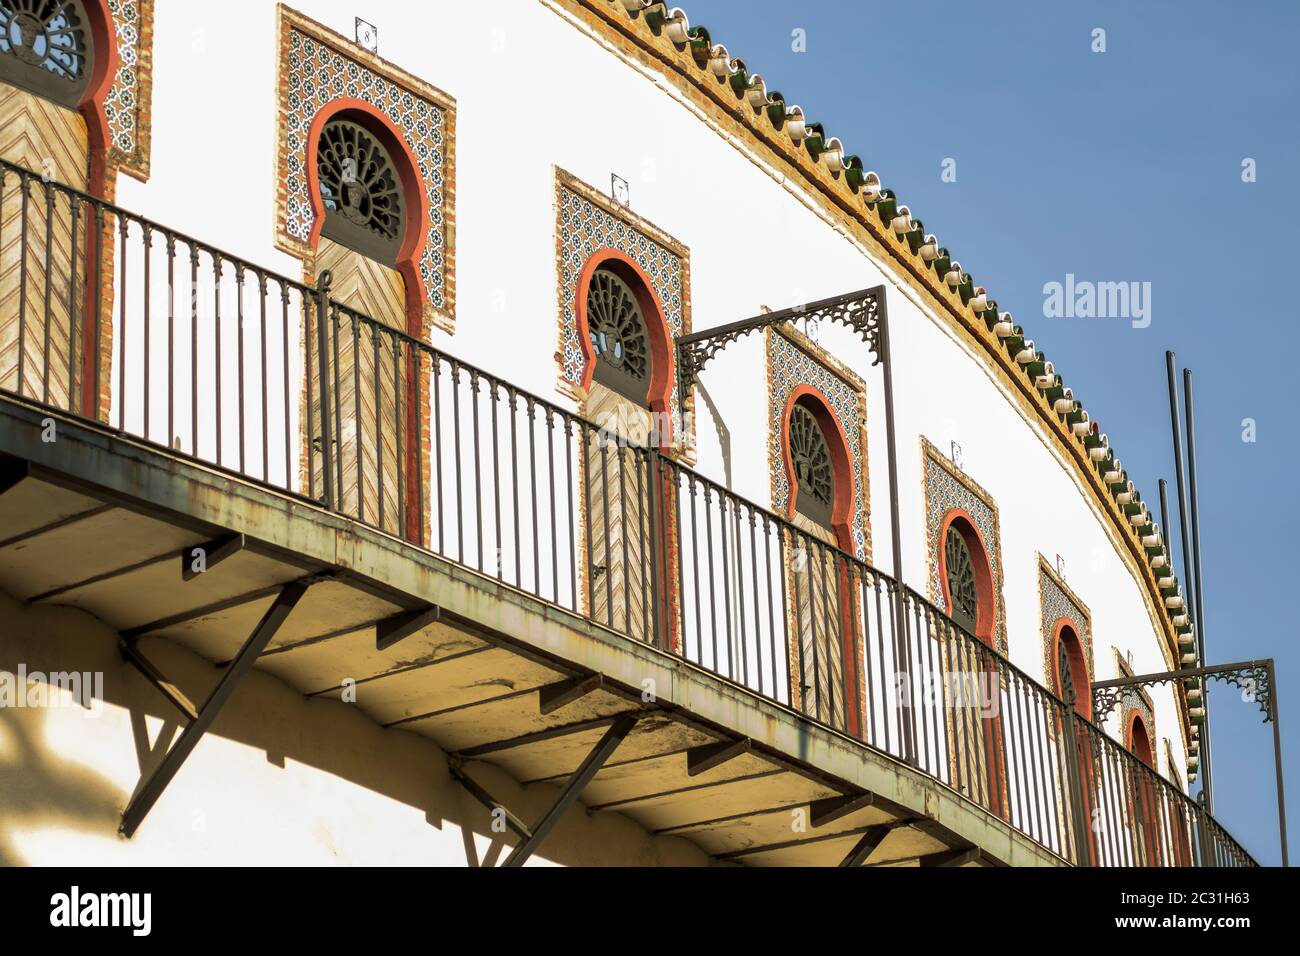 Outside balcony of the bullring of Almendralejo, in Spain, on a sunny spring afternoon with windows with arabesque elements Stock Photo